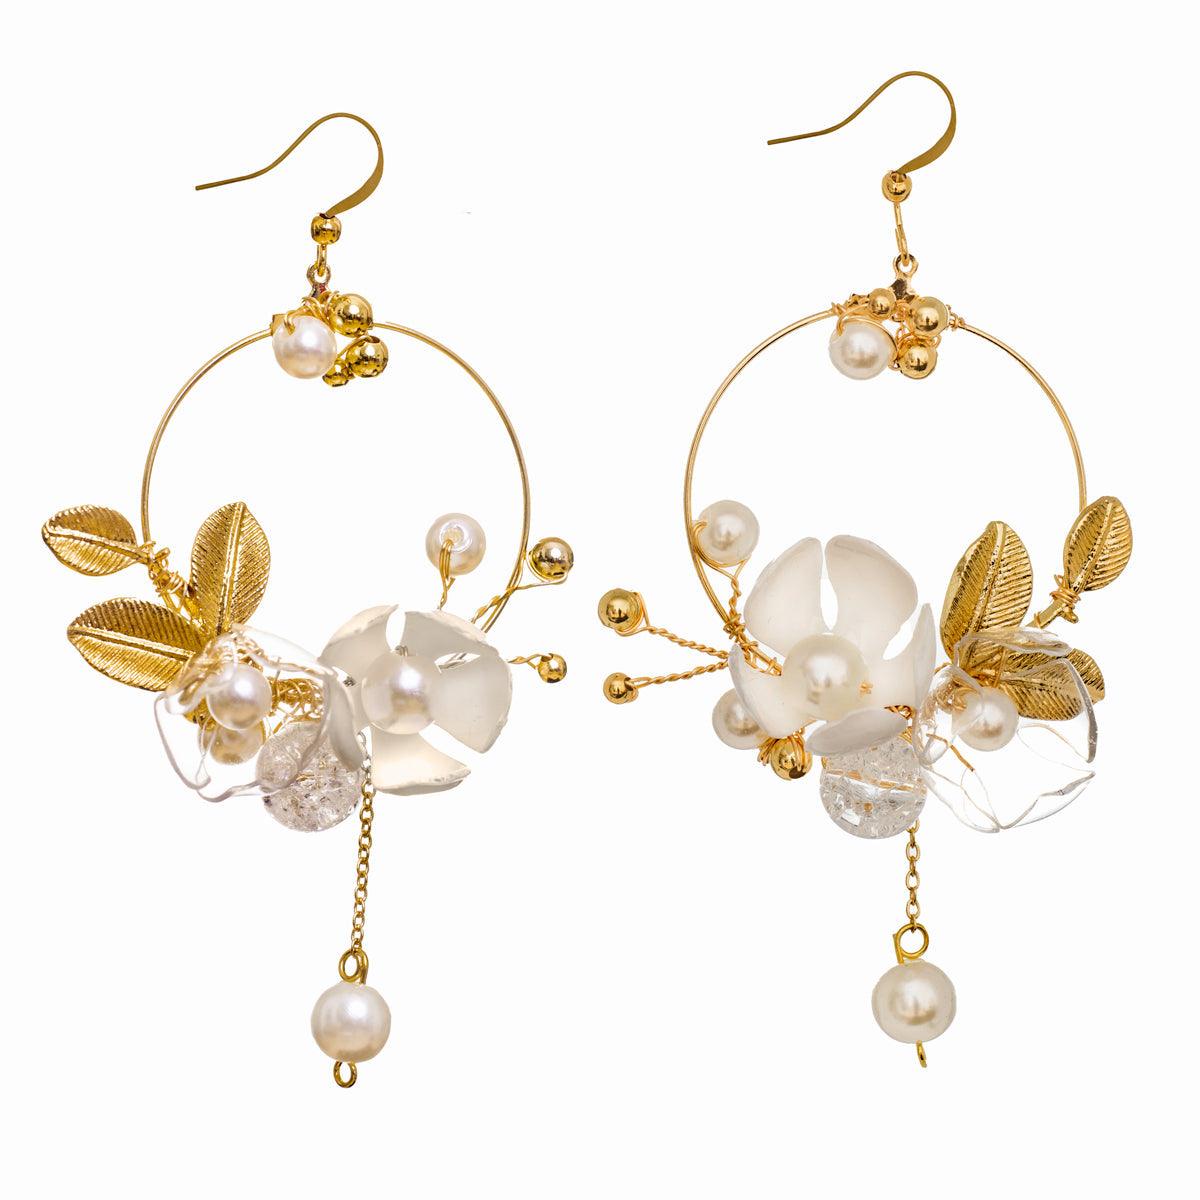 Floral Art Nouveau Earrings - Designed by Upcycle with Jing Available to Buy at a Discounted Price on Moon Behind The Hill Online Designer Discount Store